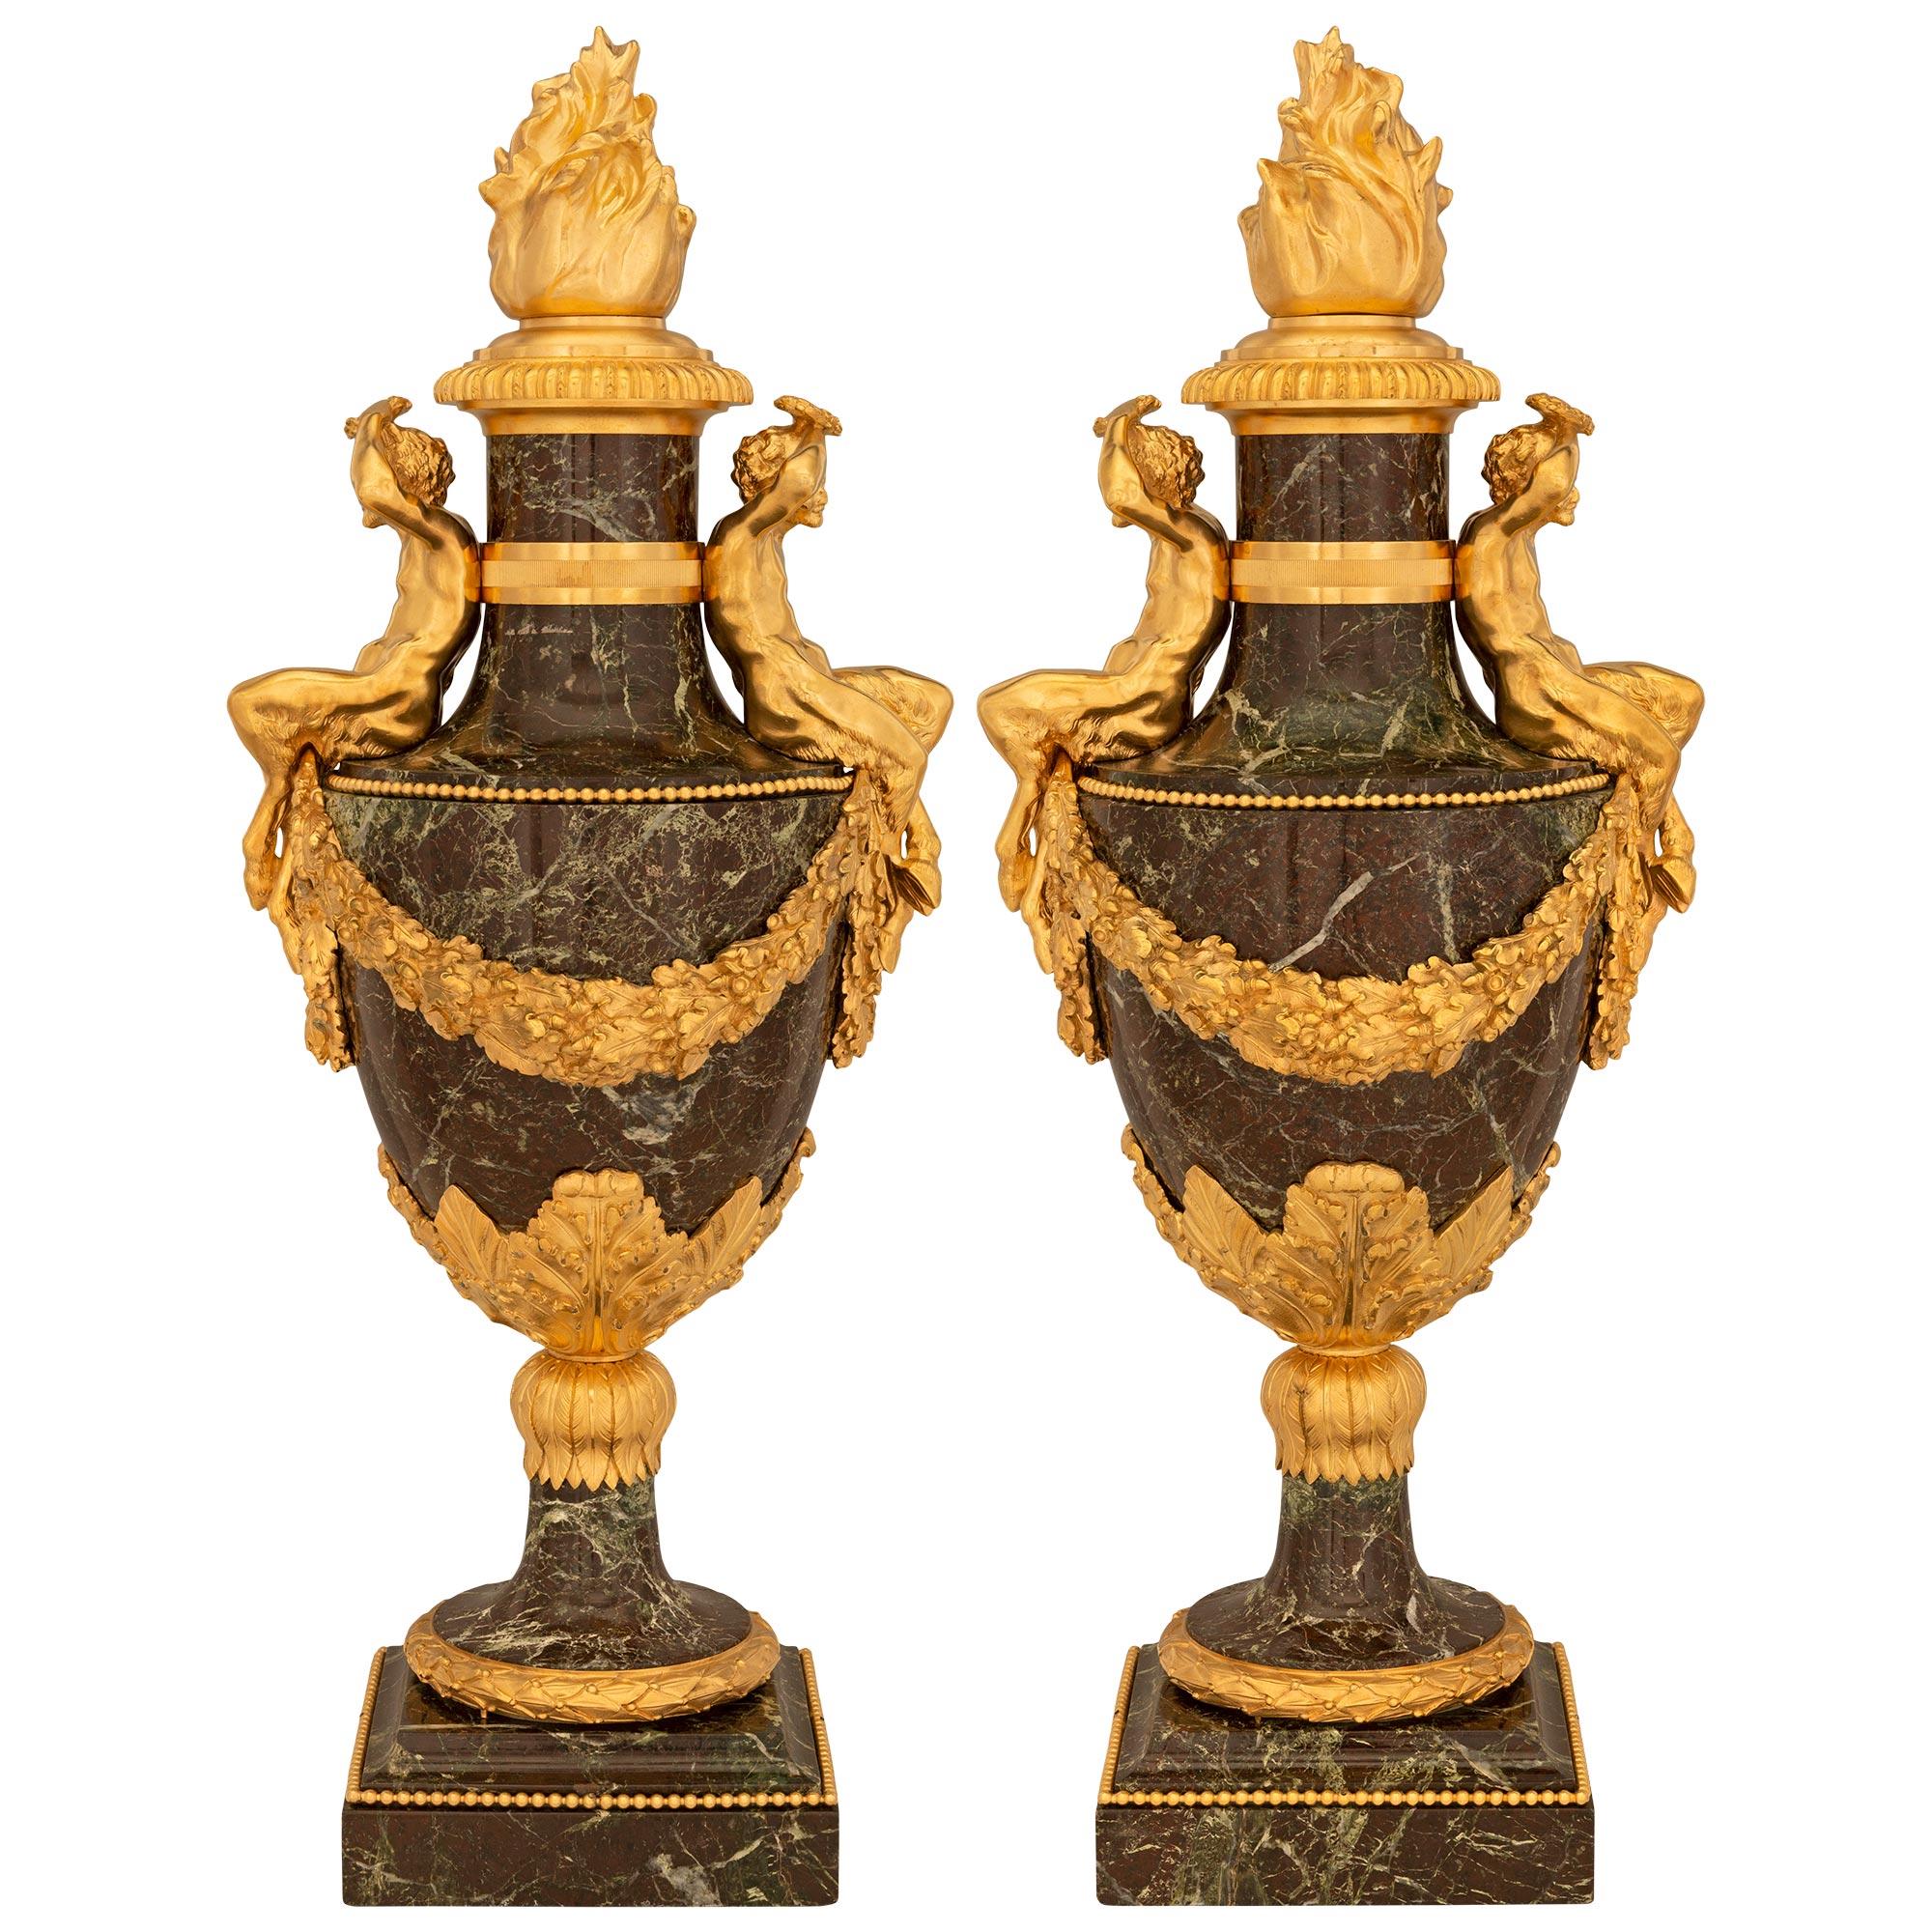 Pair of French 19th Century Belle Époque Period Marble and Ormolu Lidded Urns For Sale 6